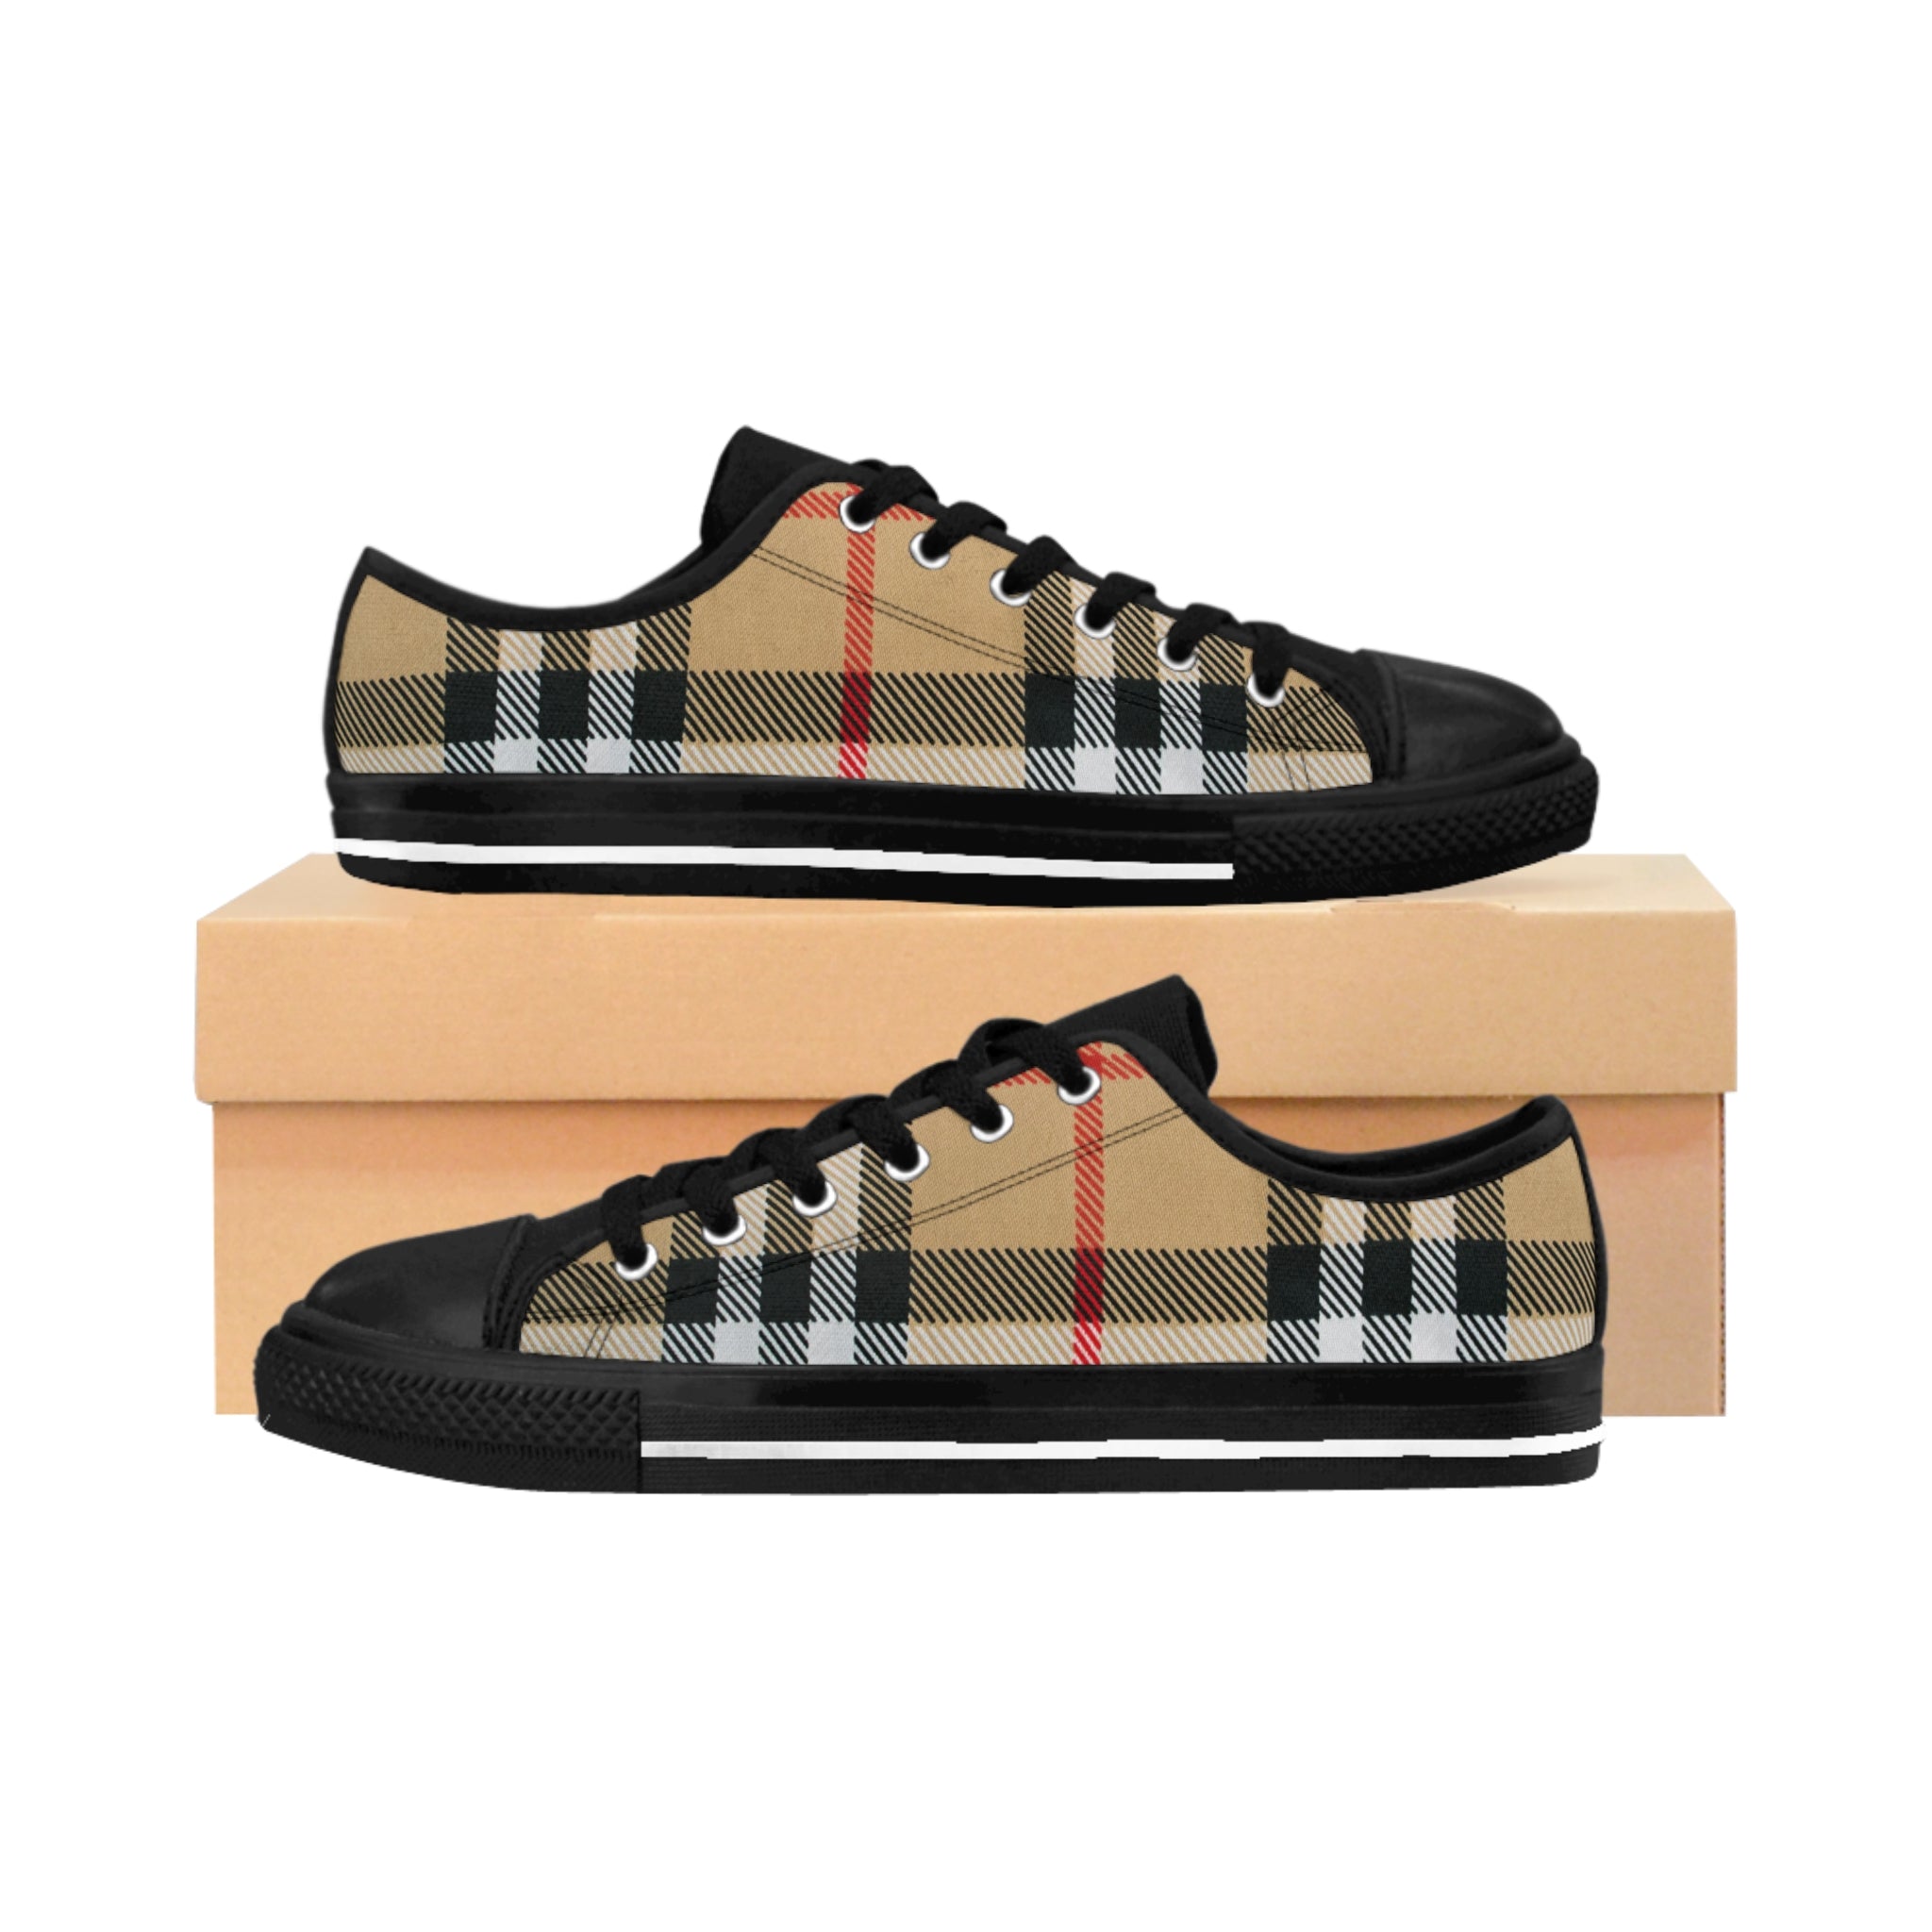  Groove Fashion Collection in Dark Plaid Men's Low Top Canvas Shoes, Men's Casual Shoes Sneakers